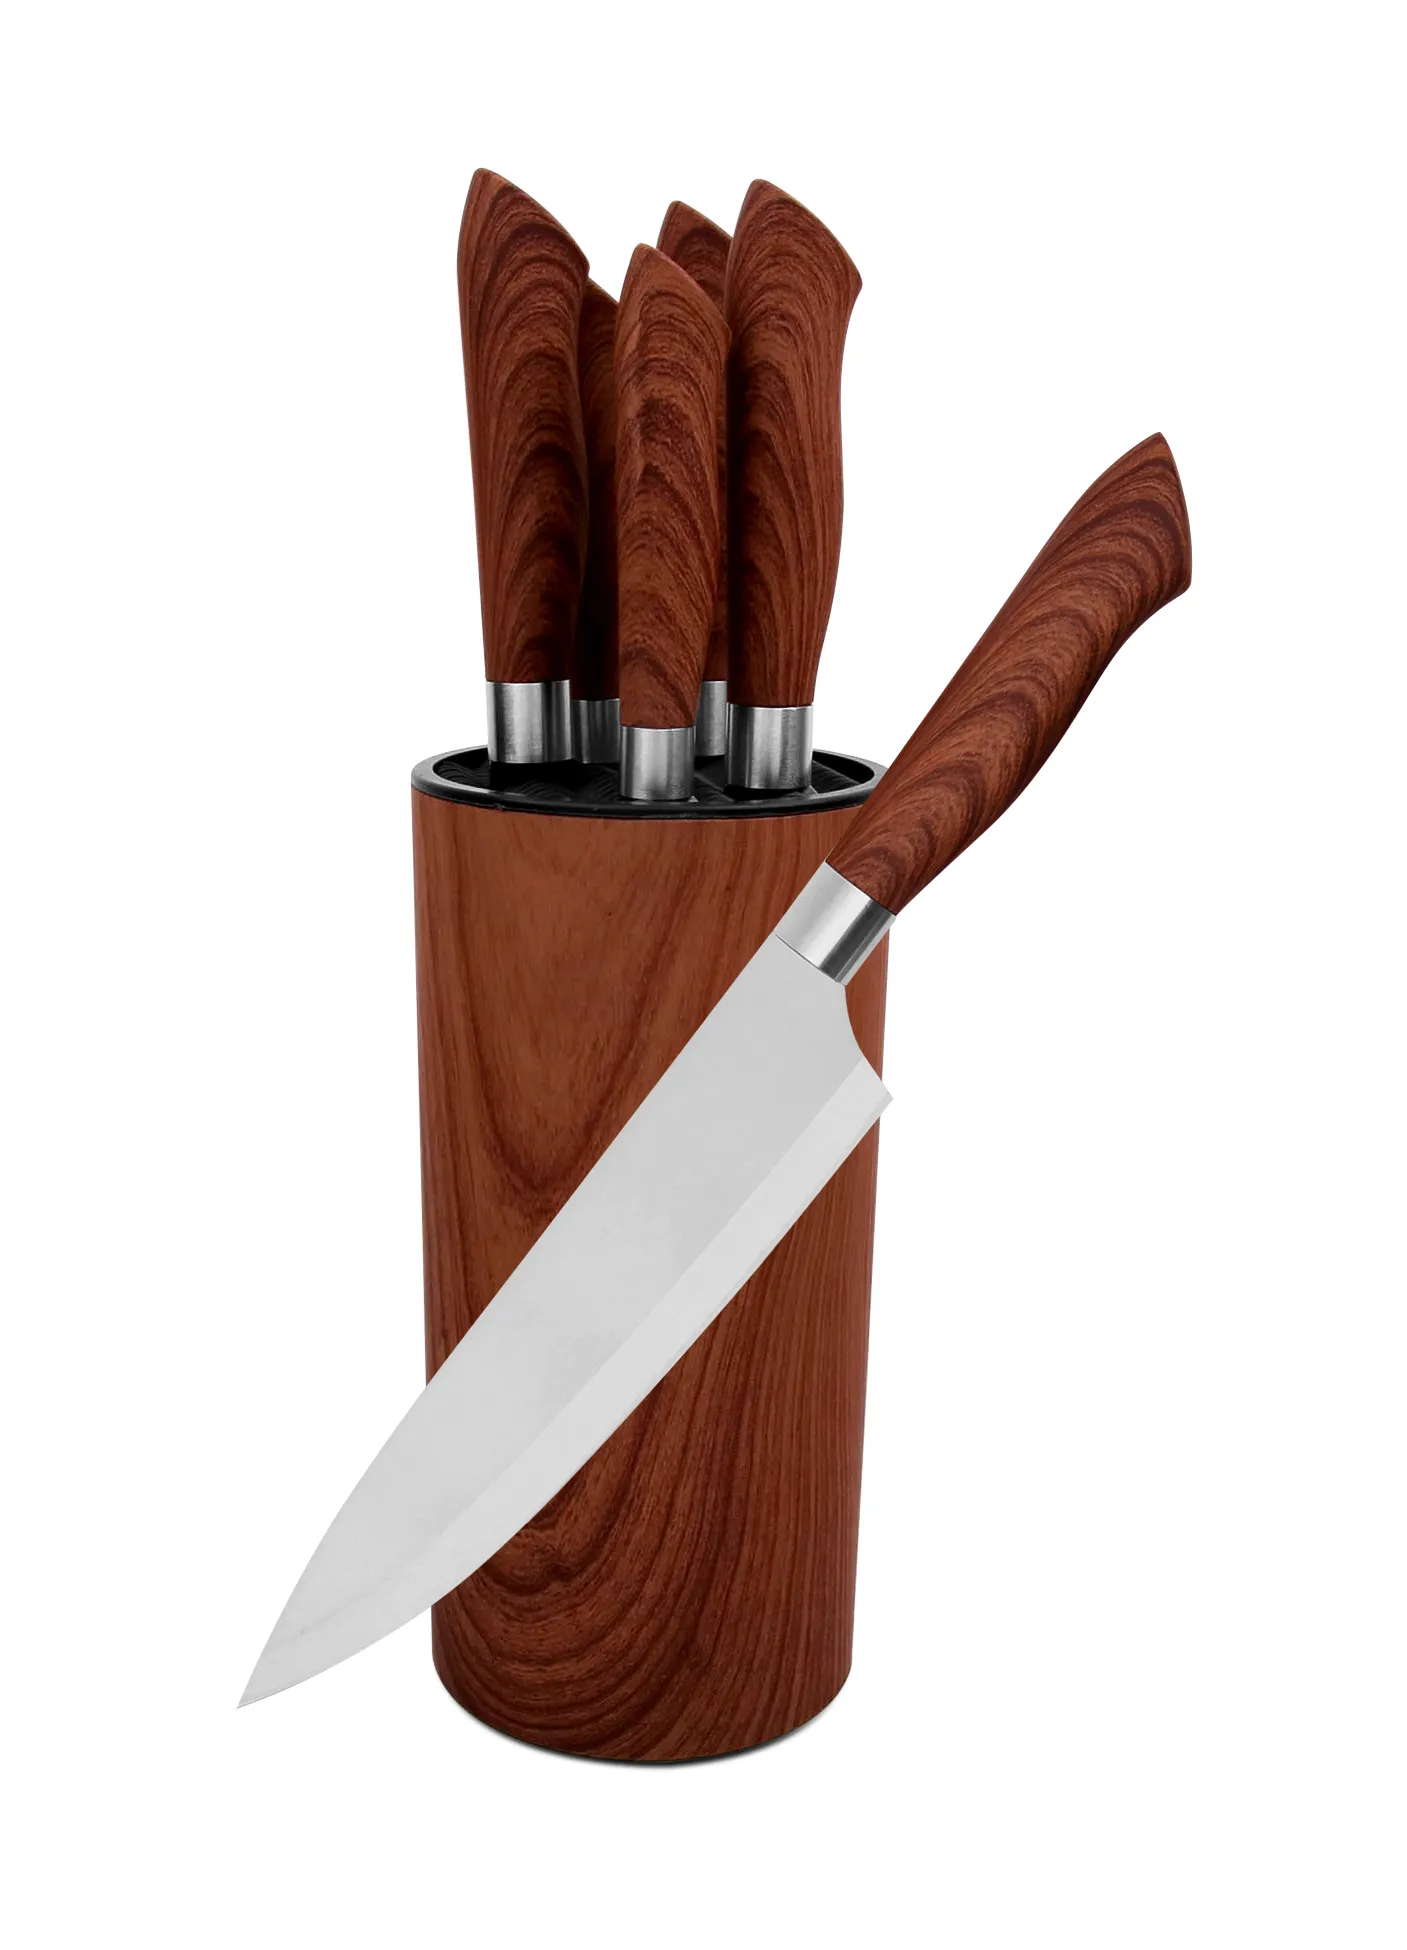 Royalford  RFU9041 6 Pcs Stainless Steel Kitchen Knives Set - 5 Knives, Polymer Stand, Stain Resistant, Classic Wooden Design - Cut and Chop with Excellence